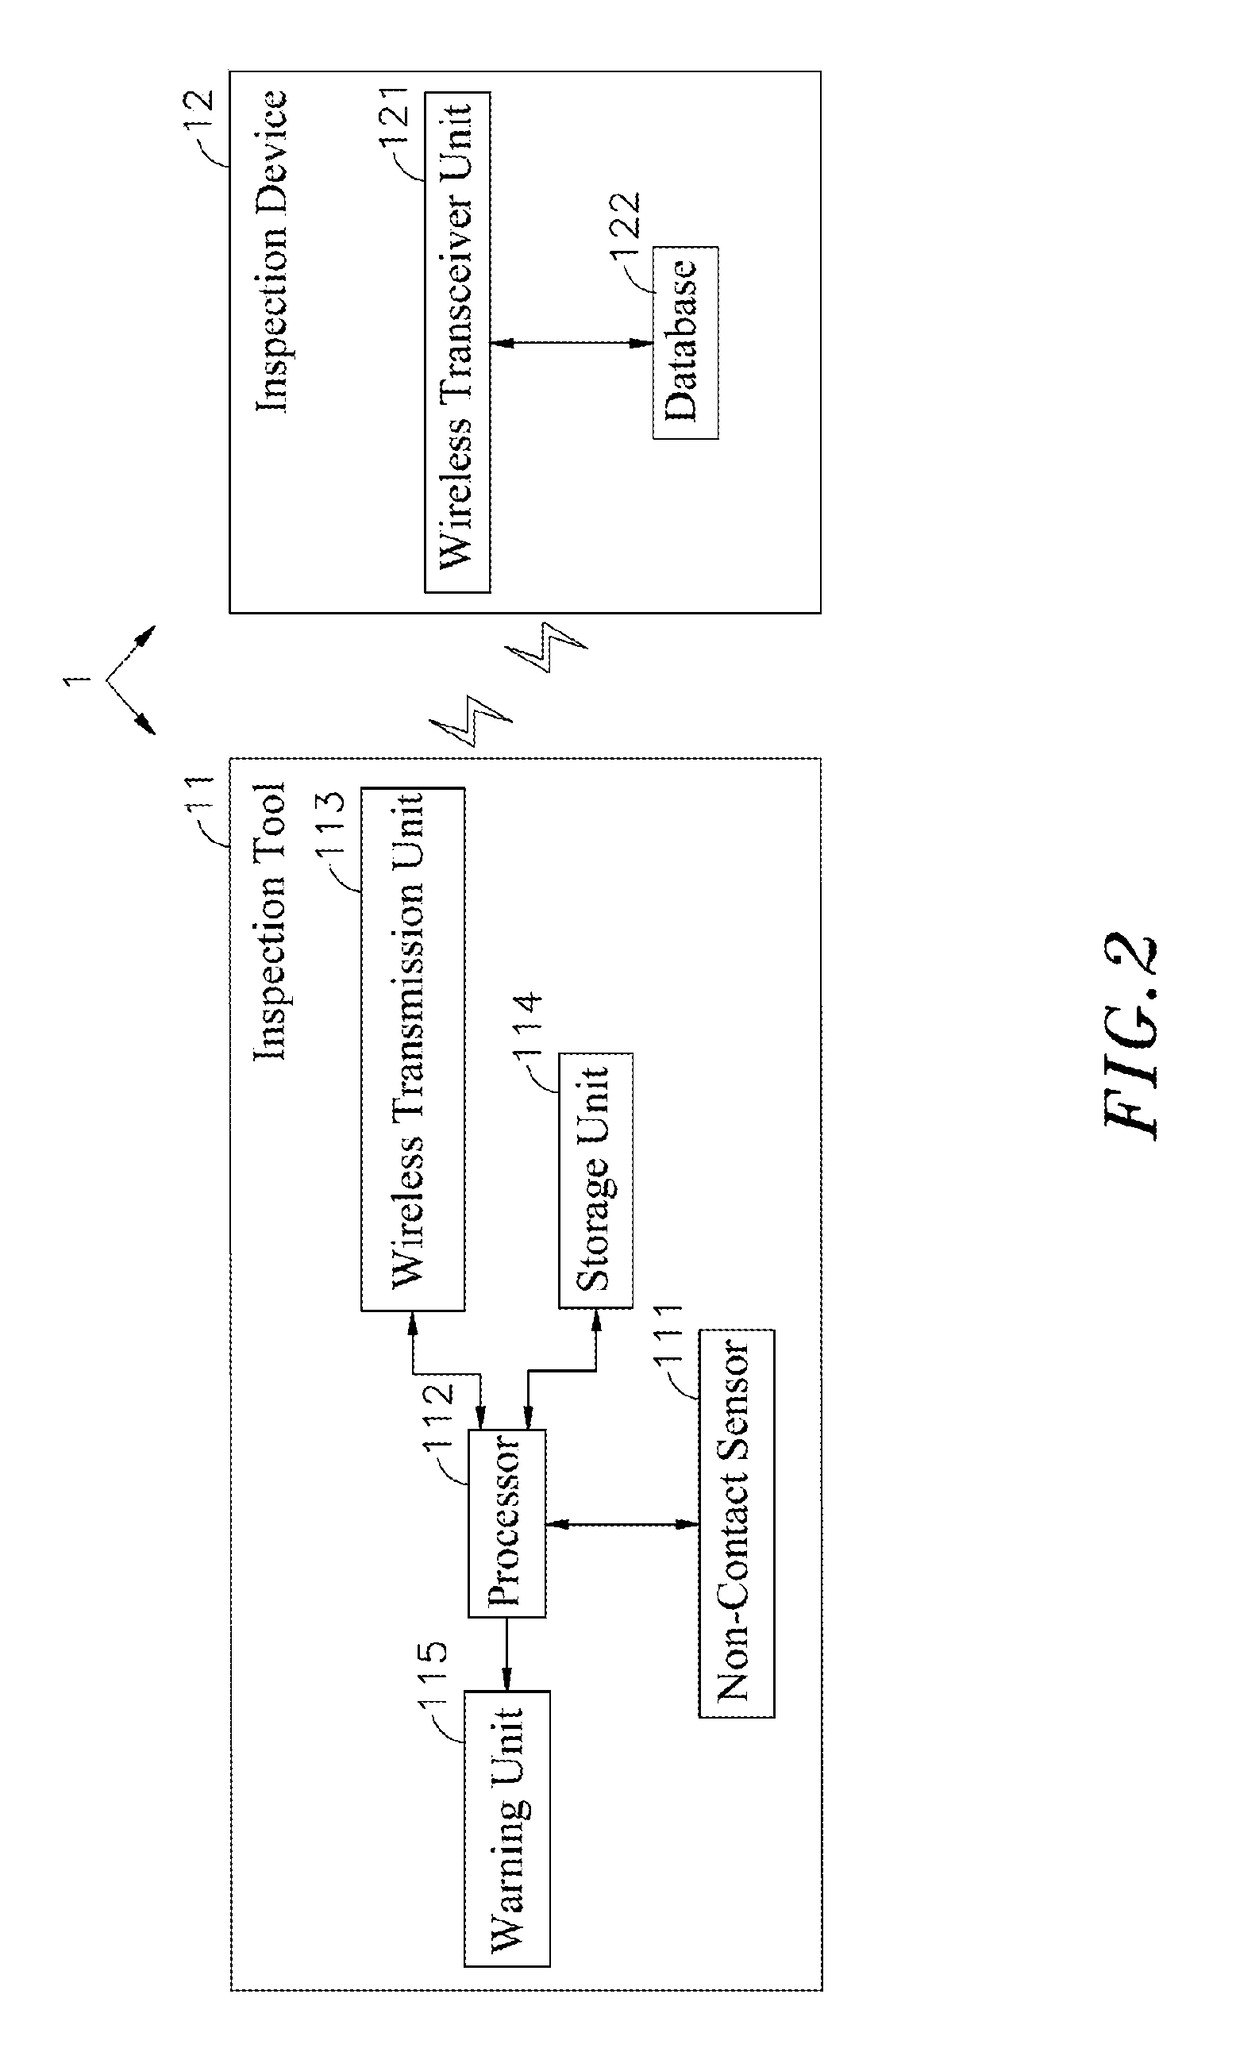 Inspection method for early warning system of industrial security